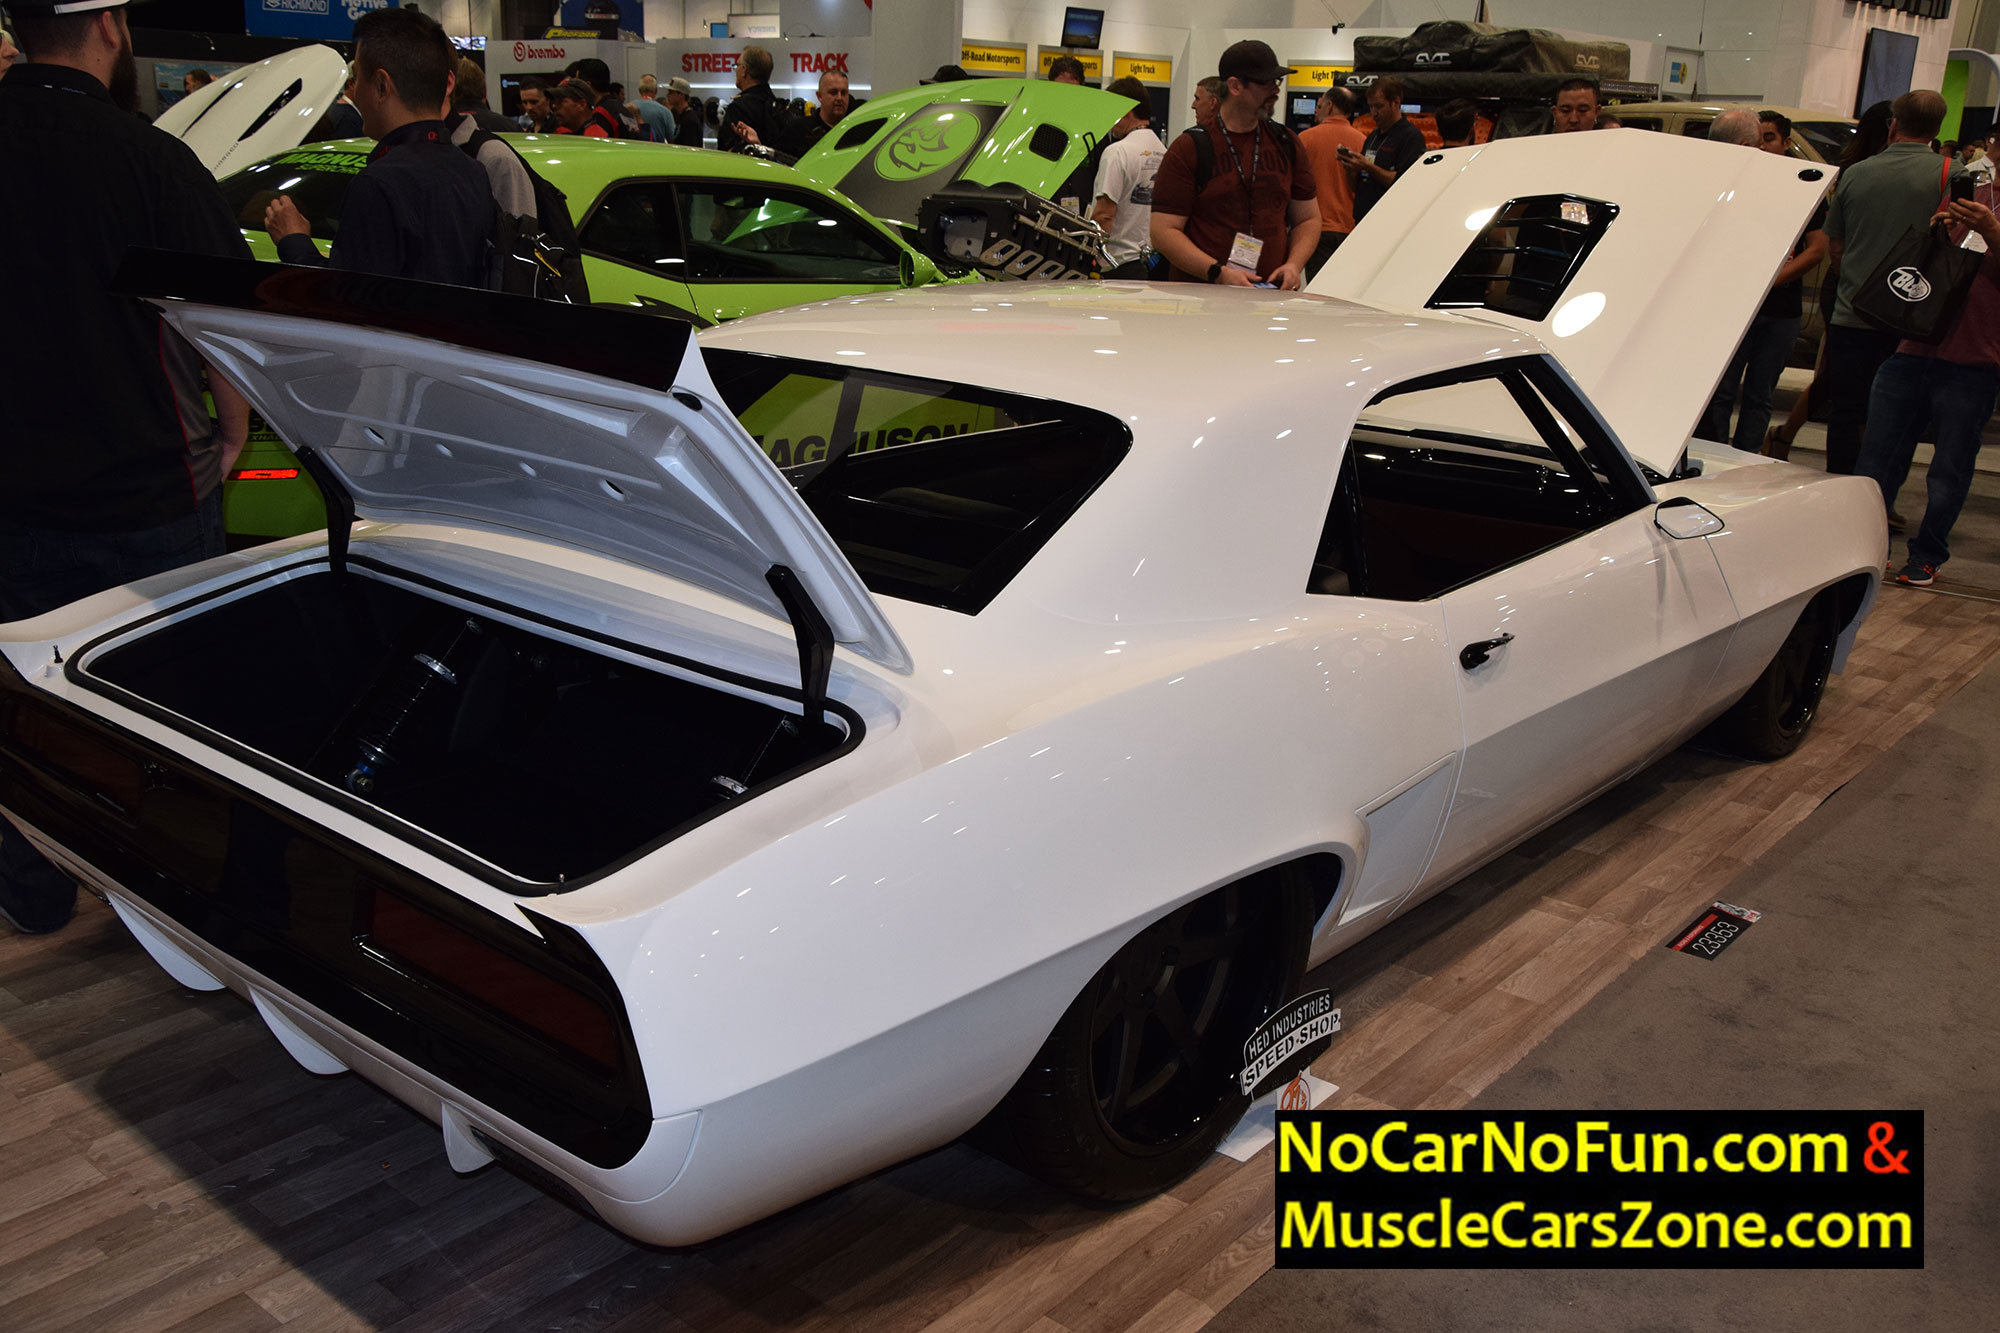 1969 Chevrolet Camaro by HED Industries 2 - Sema Show 2016 Vegas